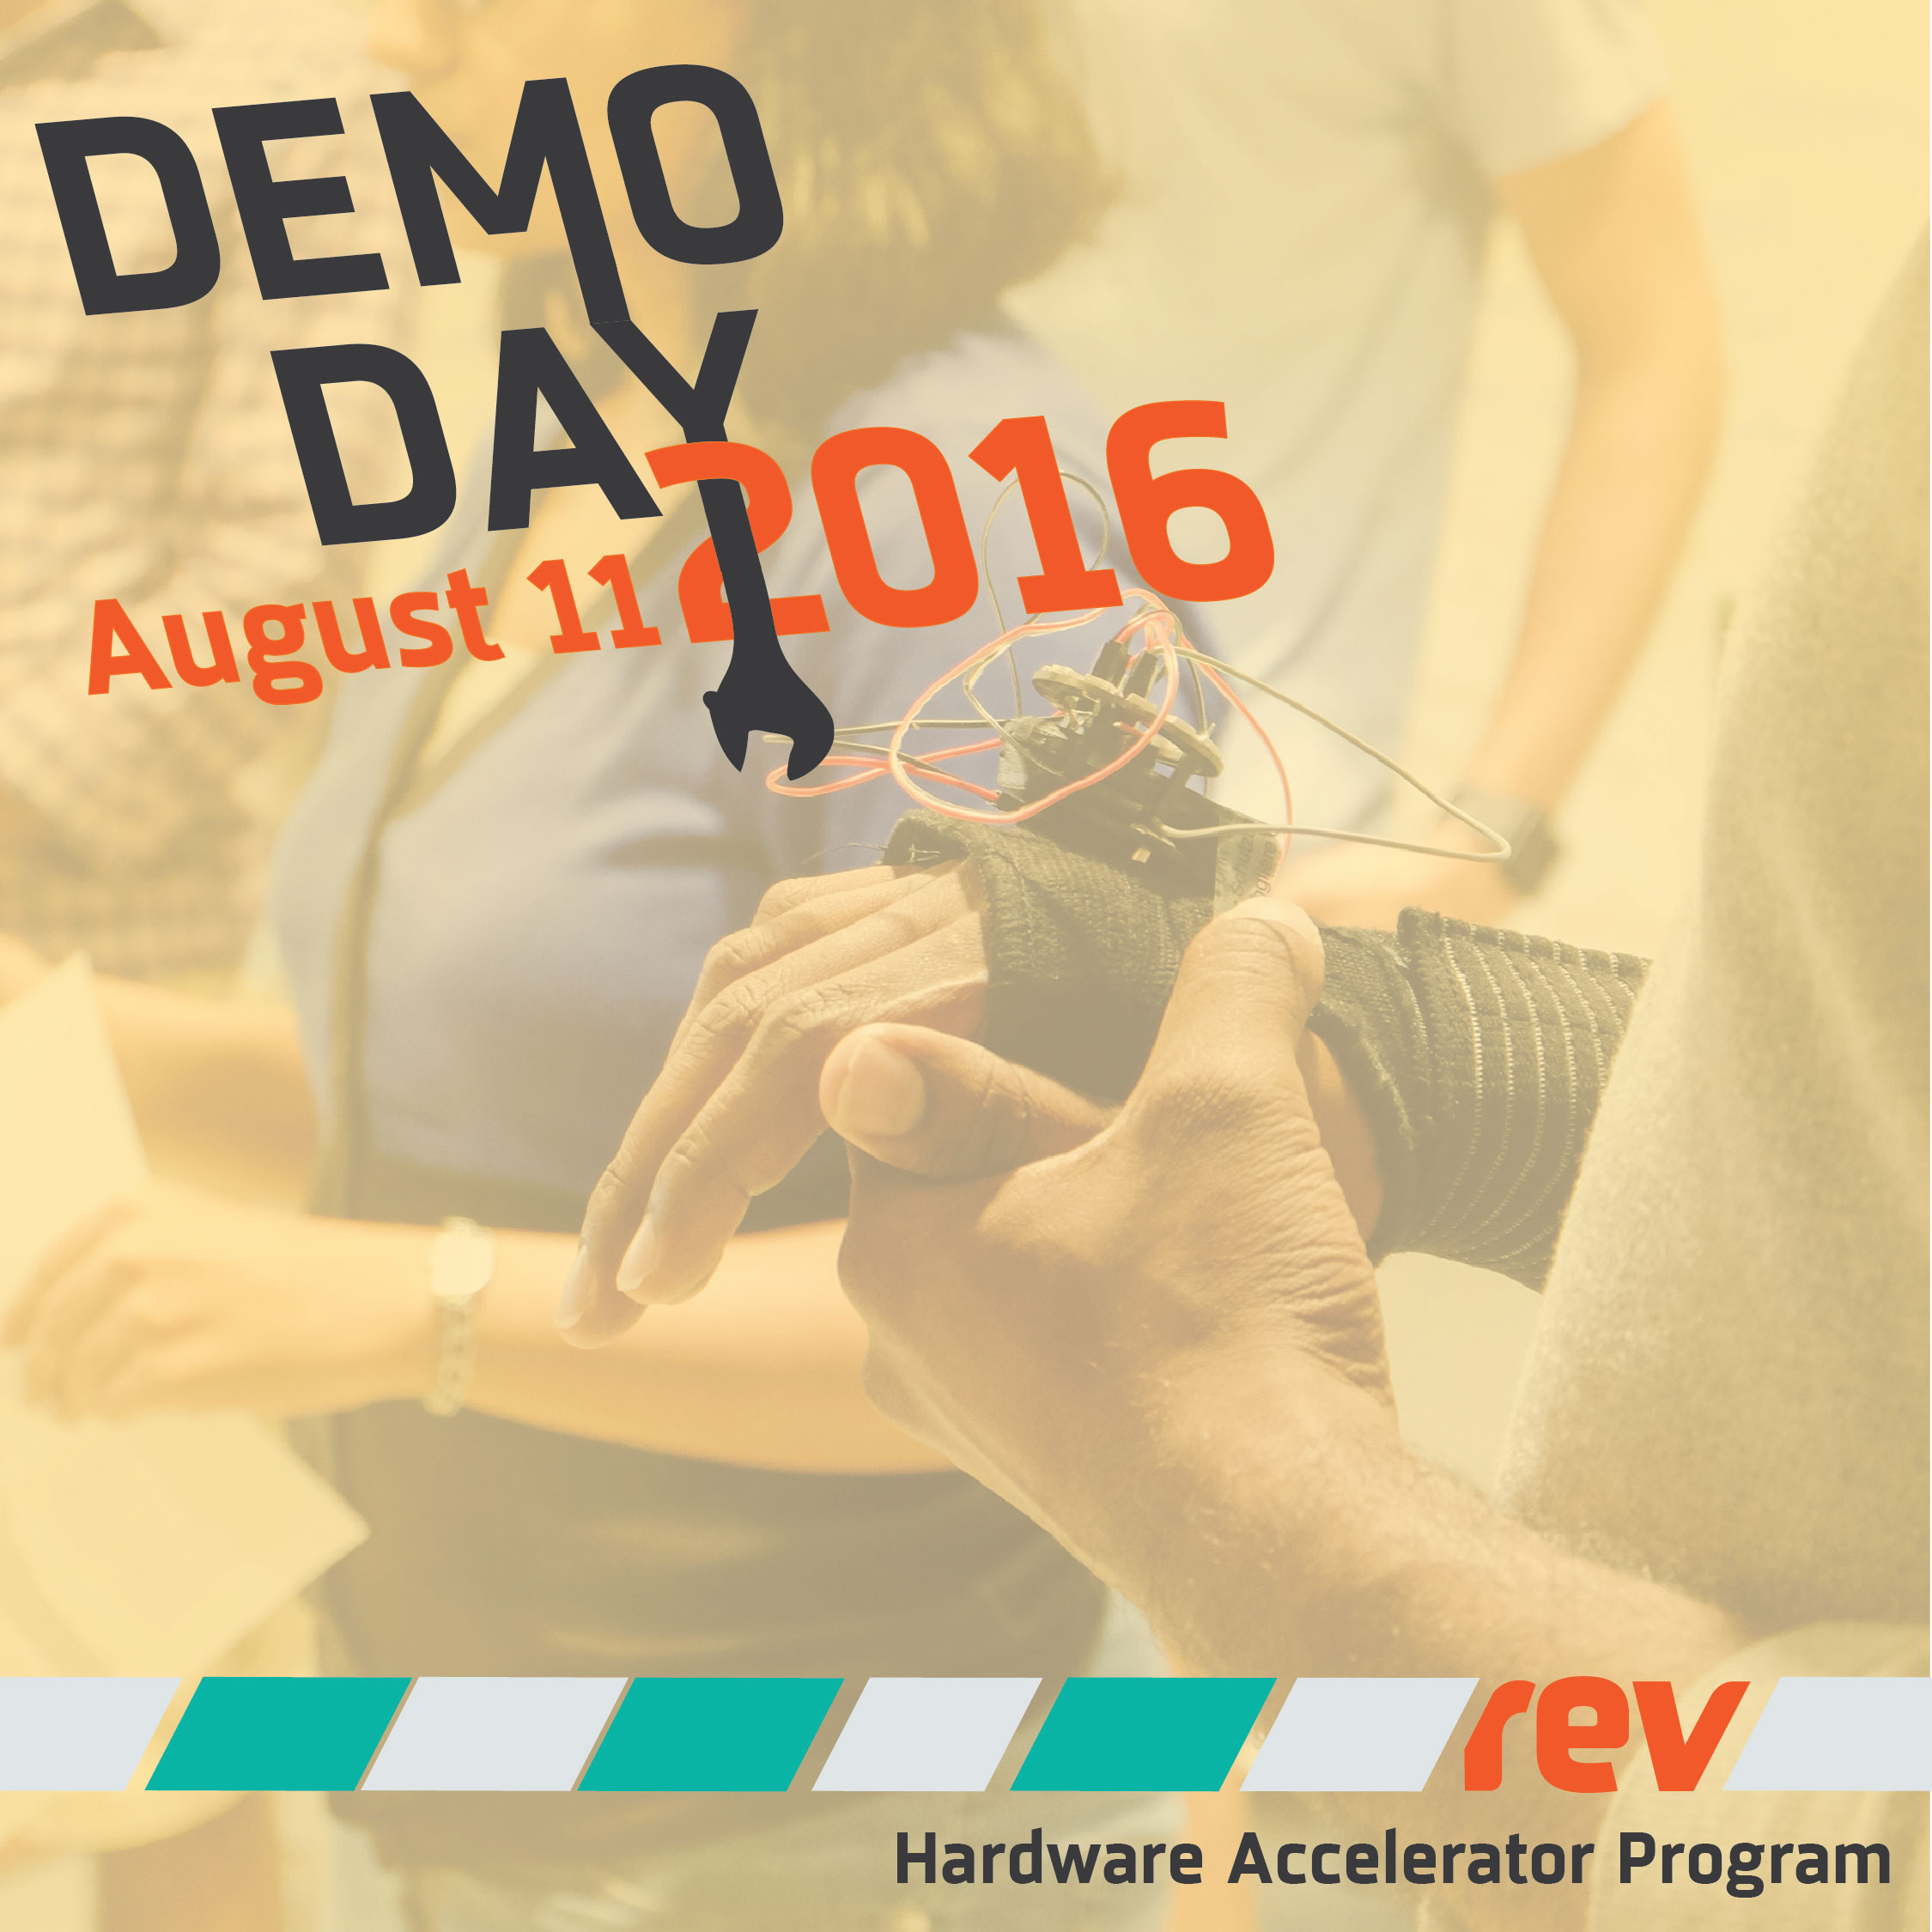 Demo Day 2016